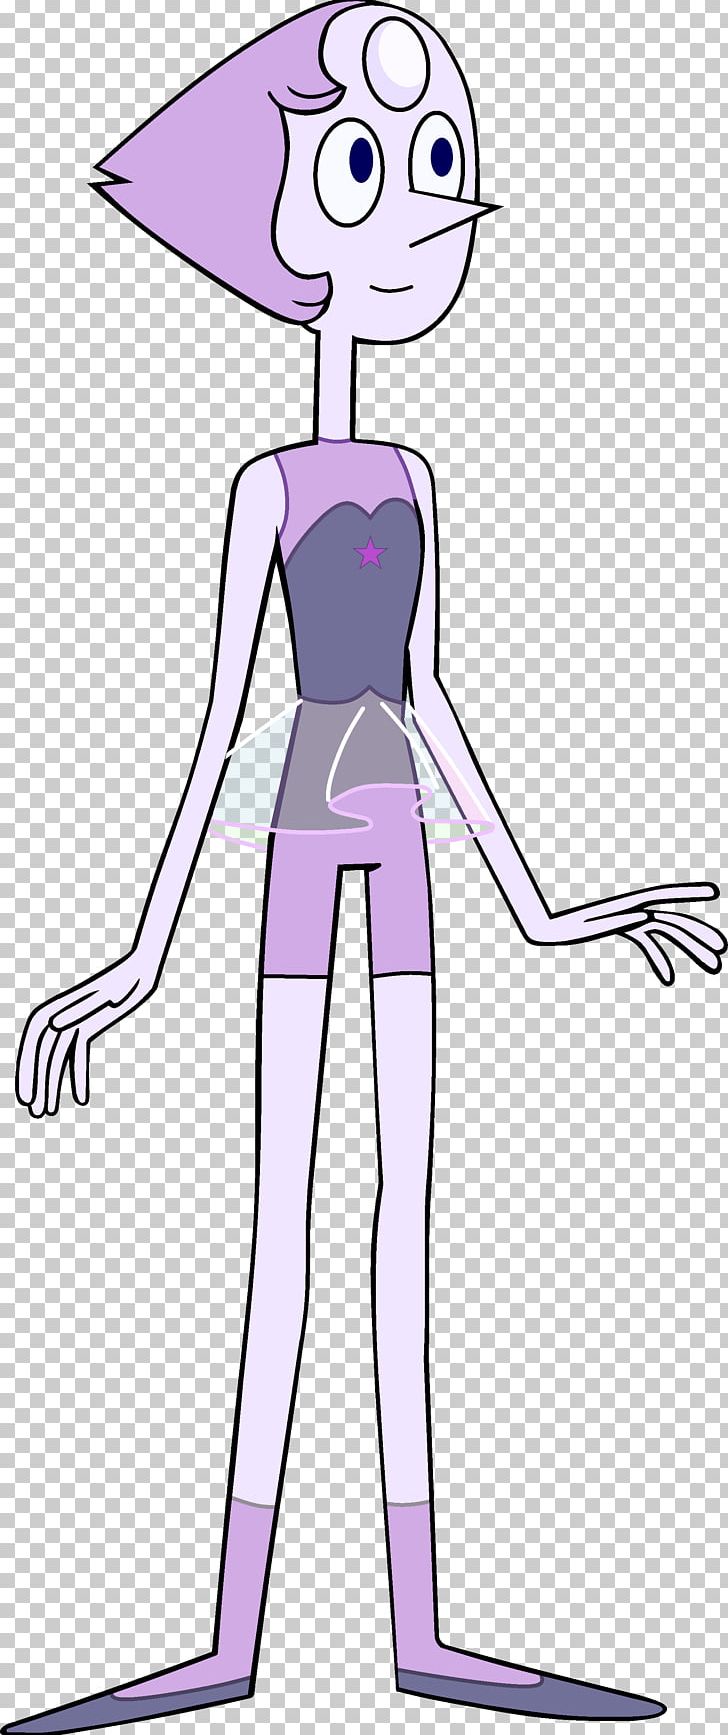 Pearl Amethyst Garnet Lapis Lazuli Gemstone PNG, Clipart, Angle, Arm, Cartoon, Child, Color Free PNG Download